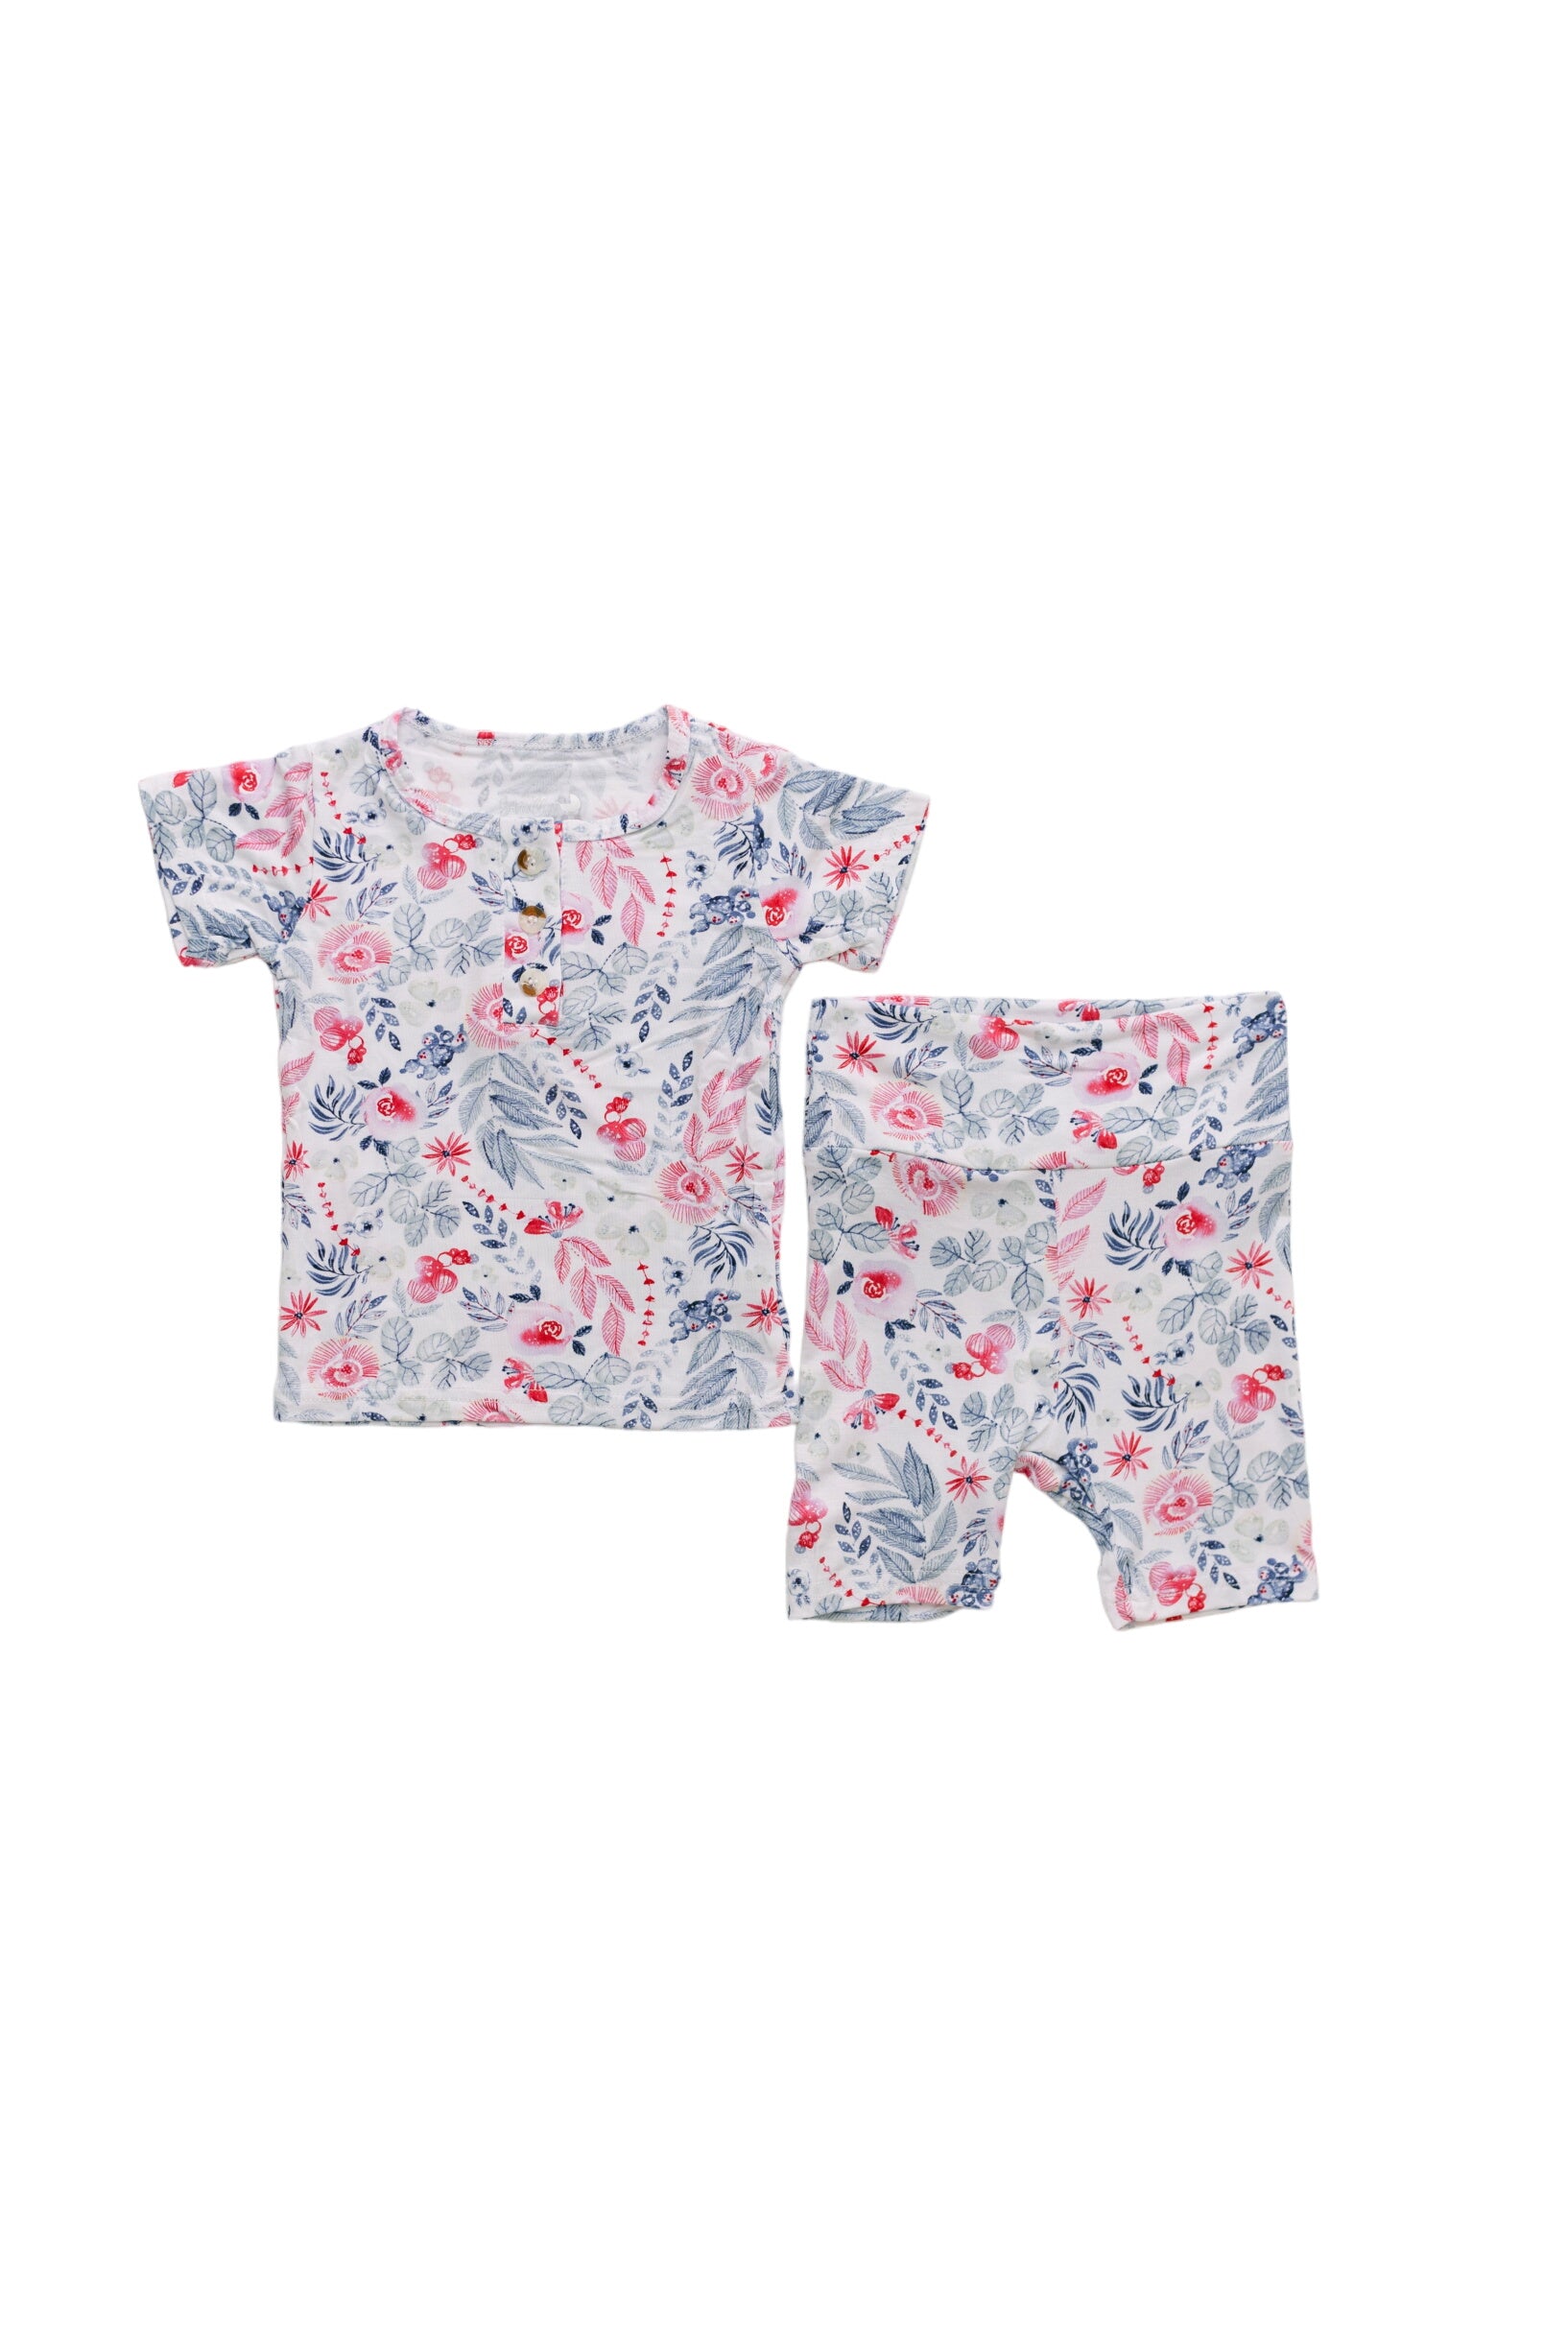 Top And Bottom Shorts Outfit (newborn - 12 Months) Bloom